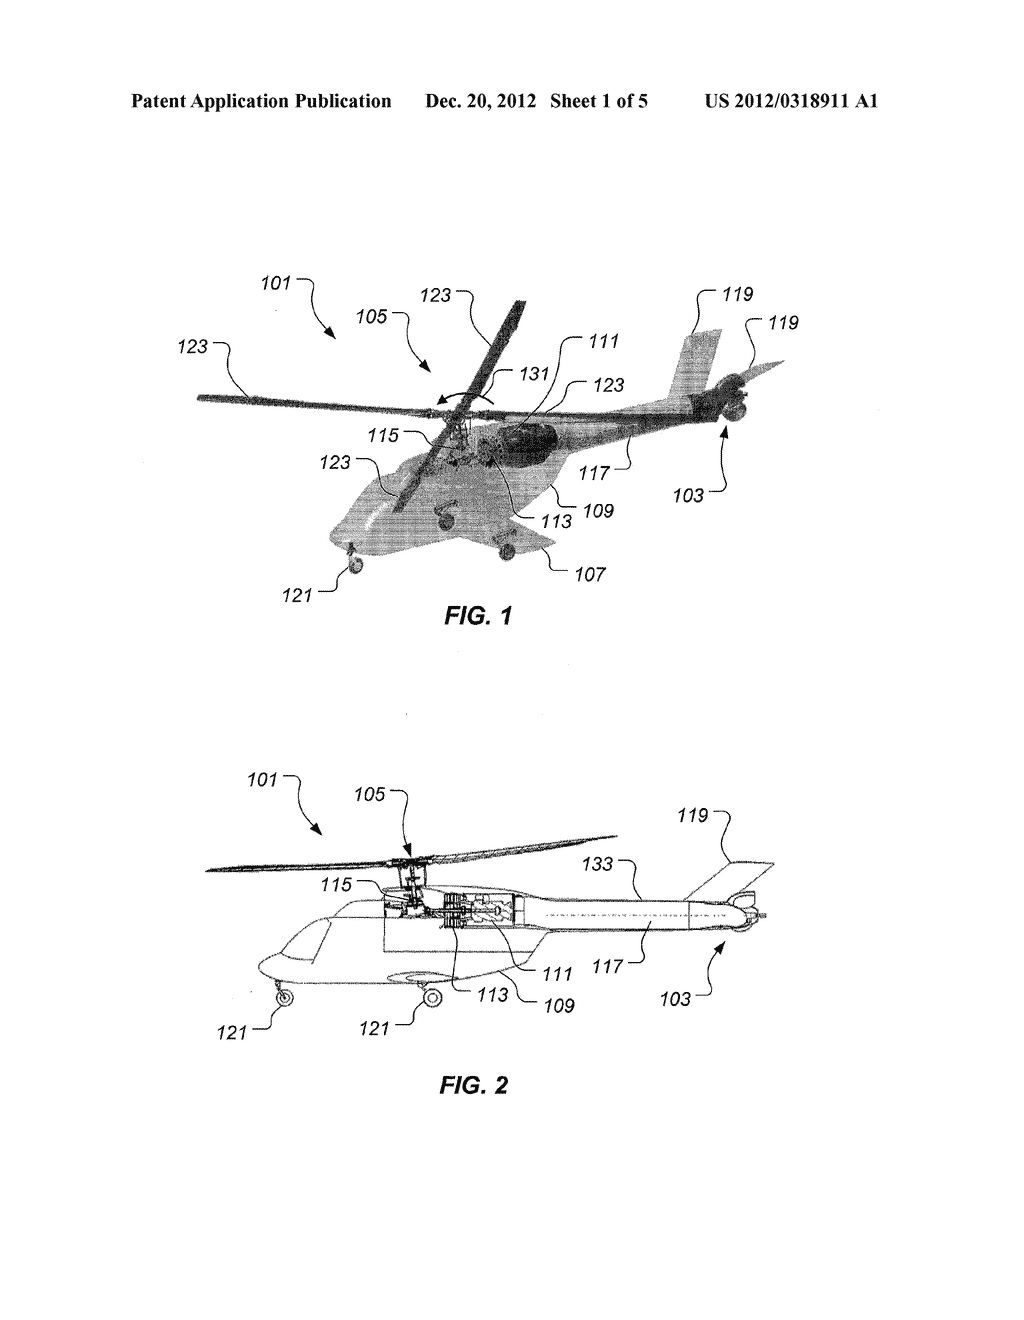 Anti-Torque Nozzle System with Internal Sleeve Valve for a Rotorcraft - diagram, schematic, and image 02